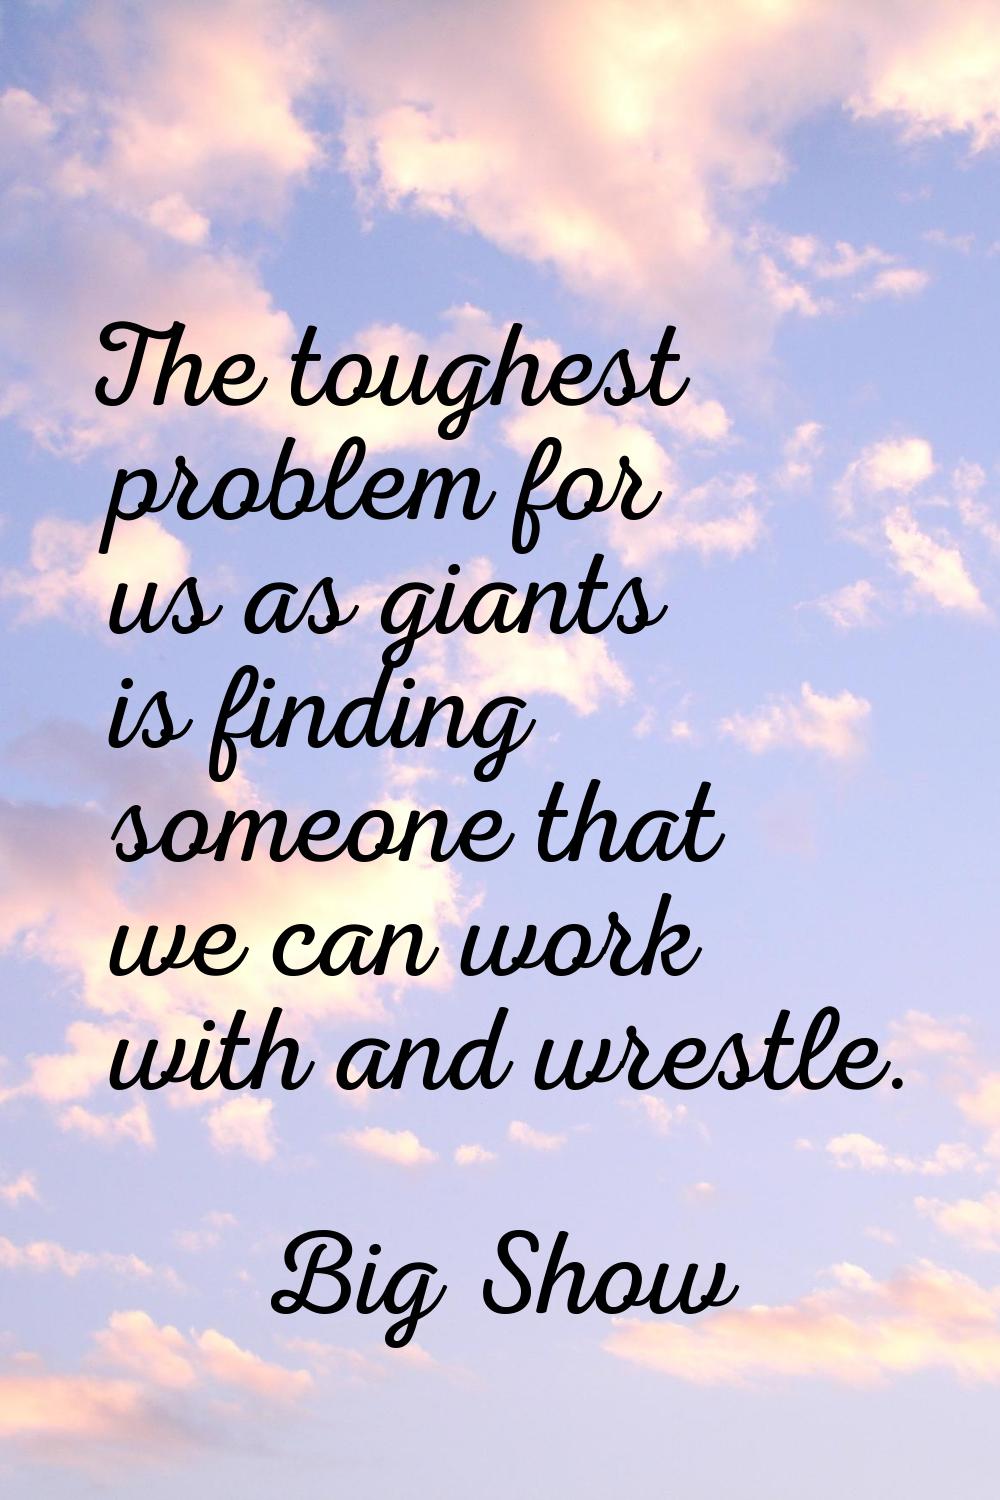 The toughest problem for us as giants is finding someone that we can work with and wrestle.